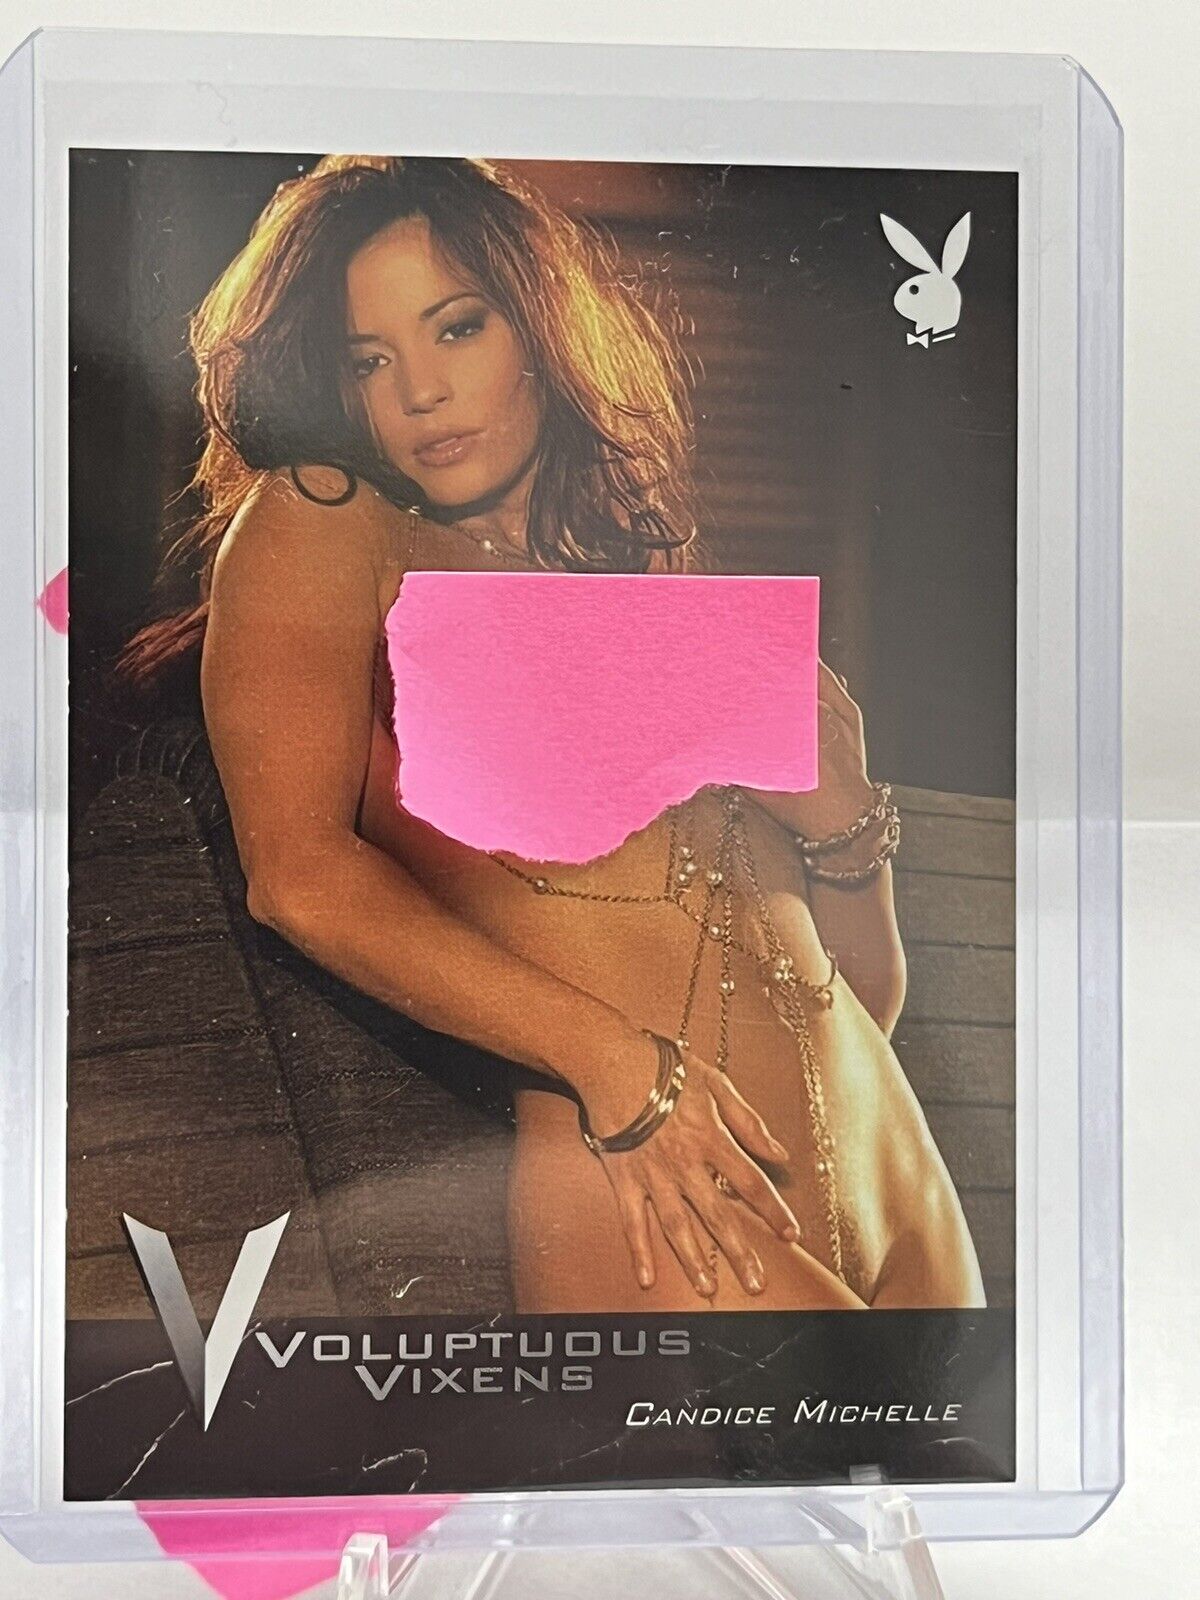 Candice Michelle  (Former WWE Star) Nude Playboy Card 🥵🥵